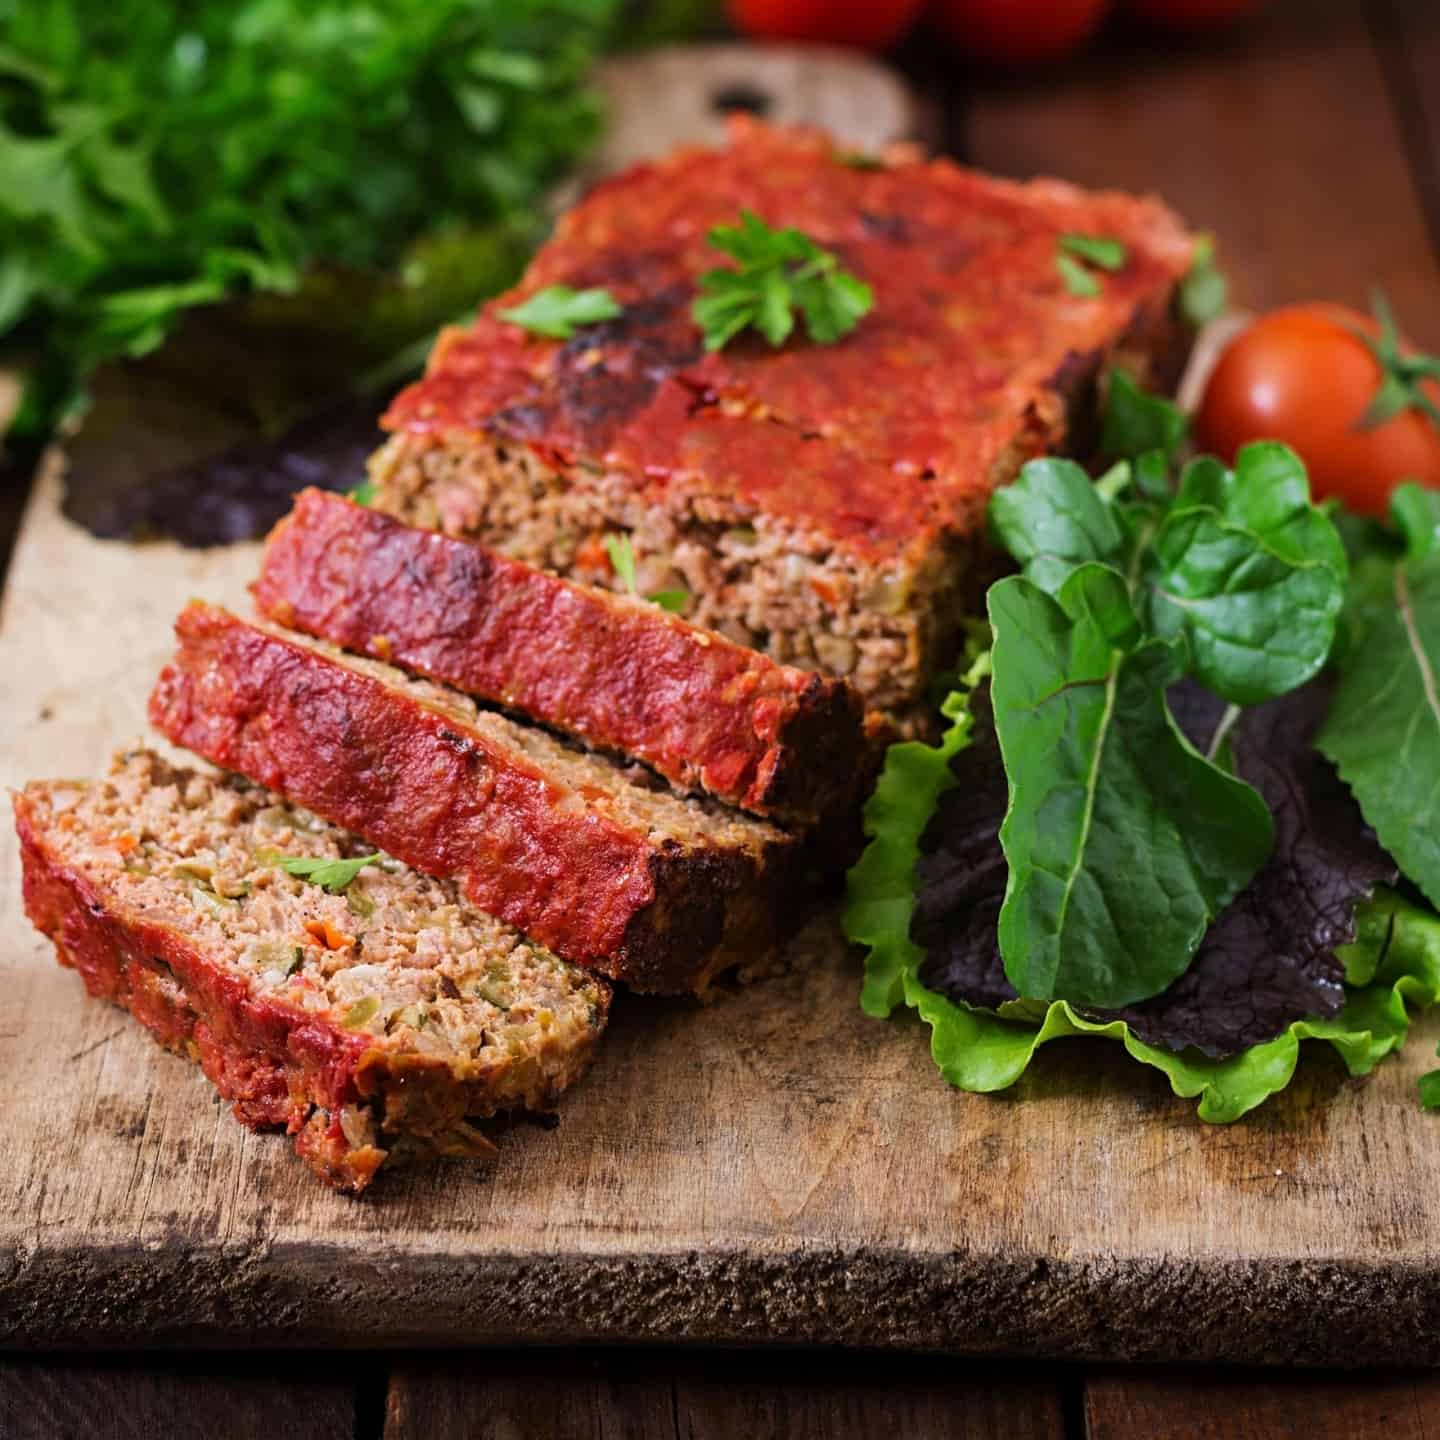 Easy Meatloaf Recipe with Few Ingredients - Featured